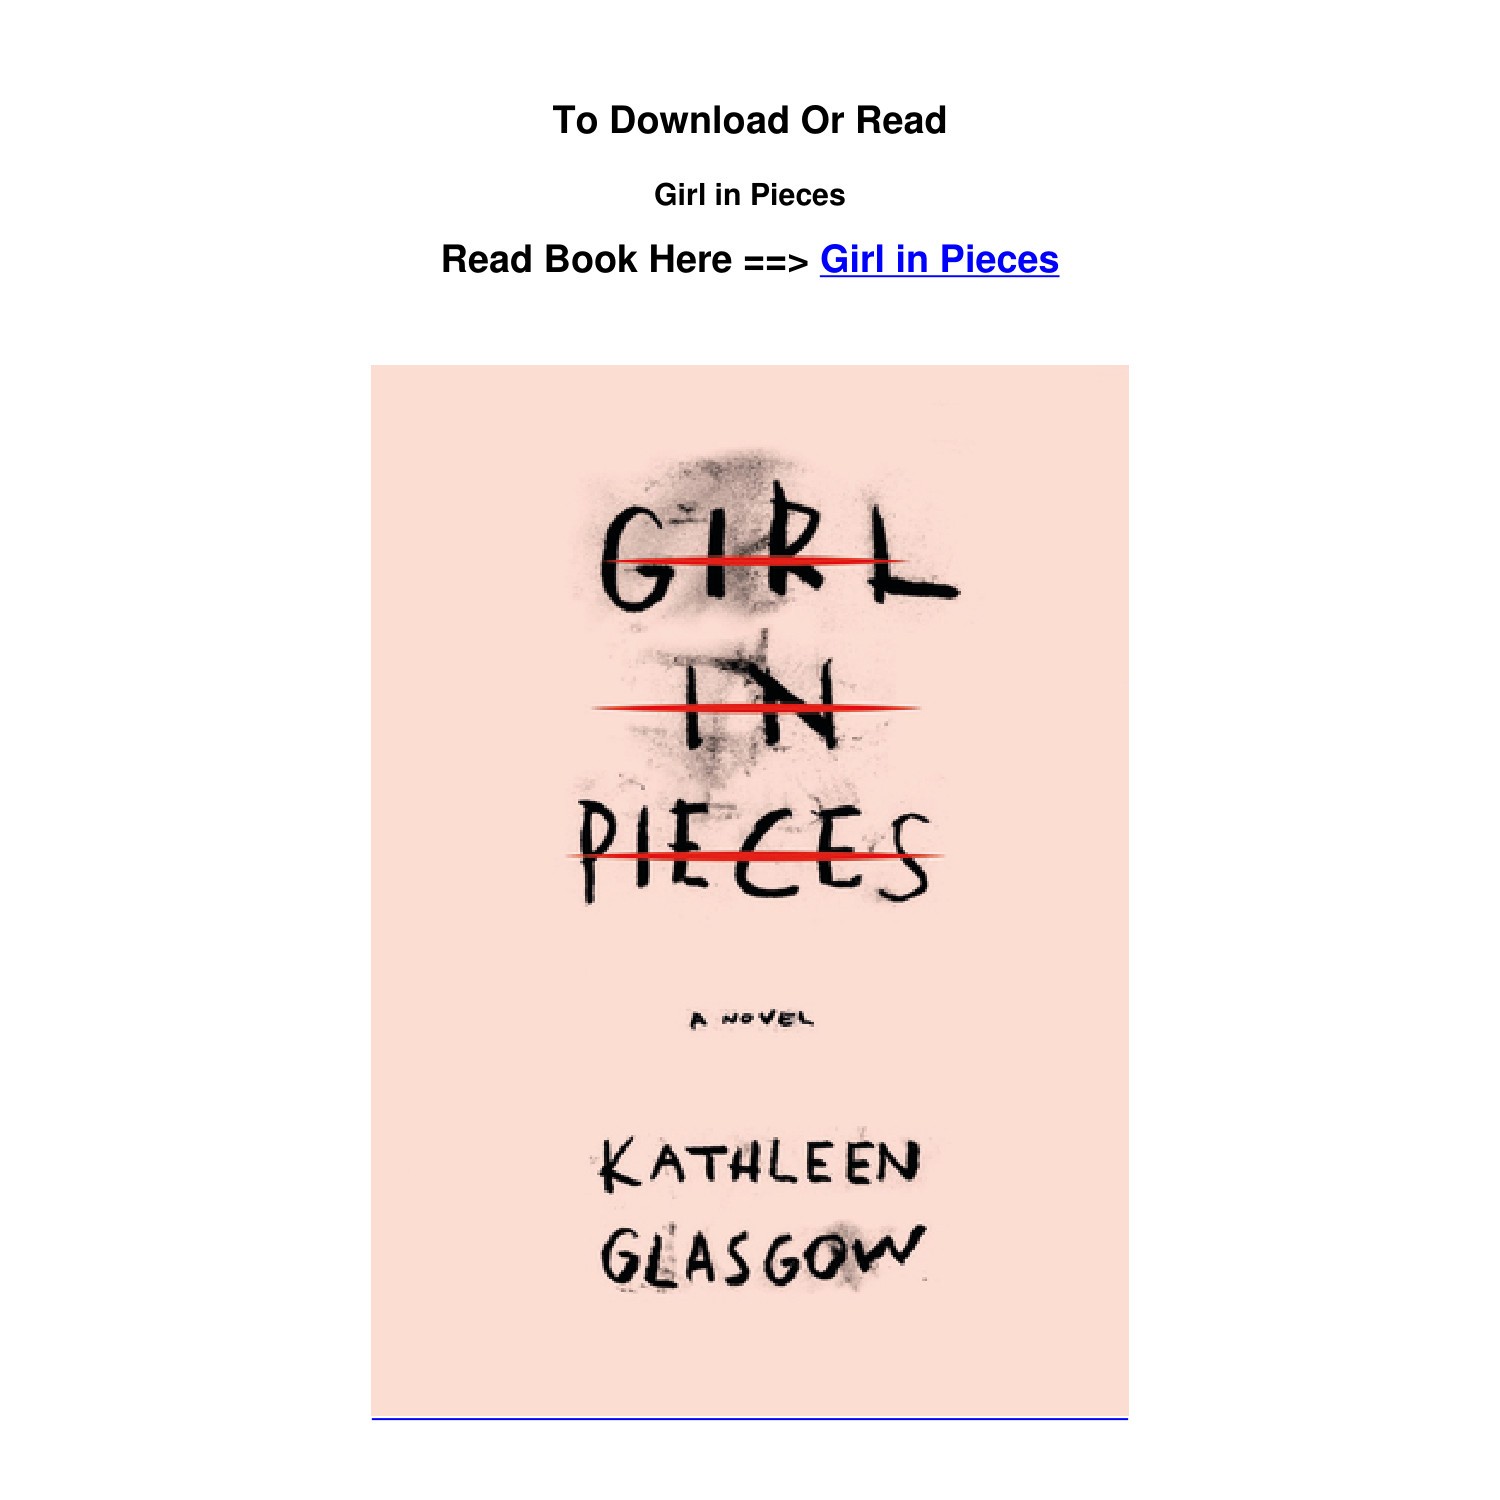 pdf Download Girl in Pieces BY Kathleen Glasgow.pdf